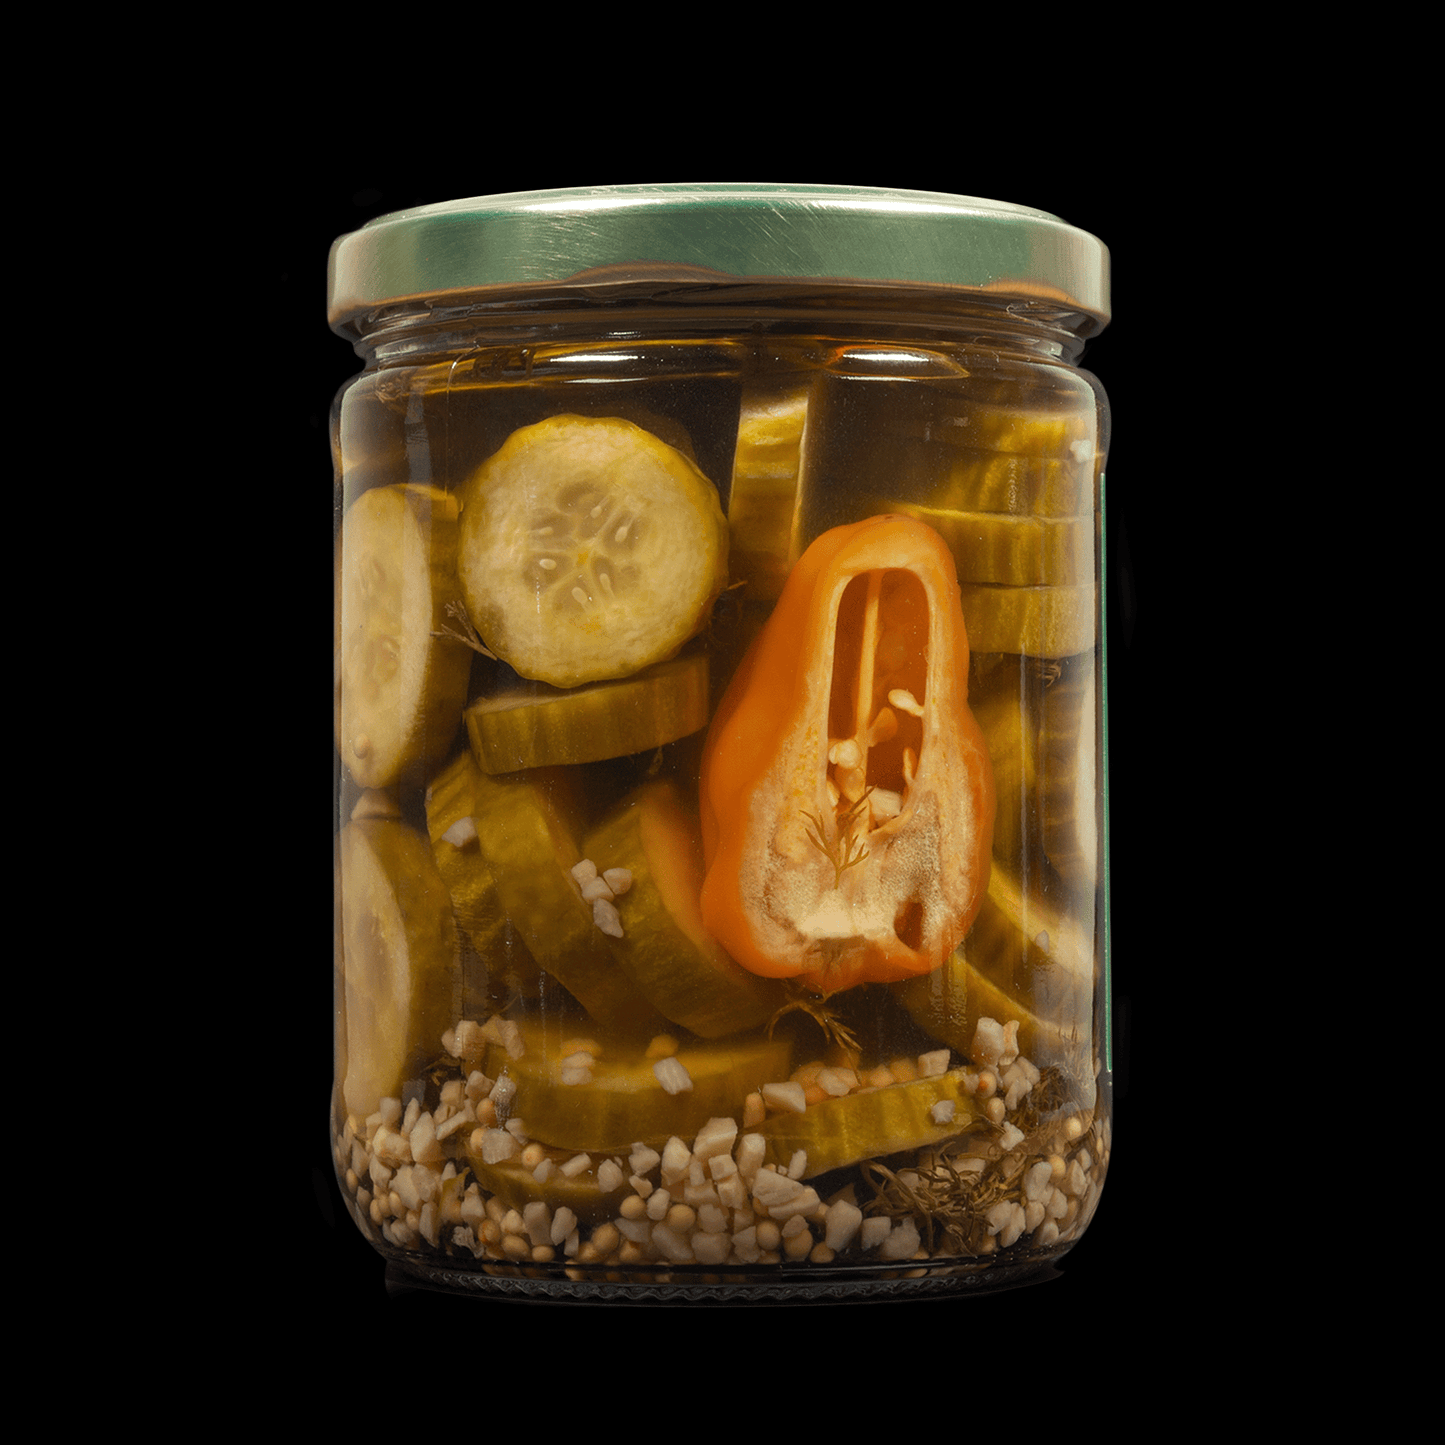 Sour Dill Pickles